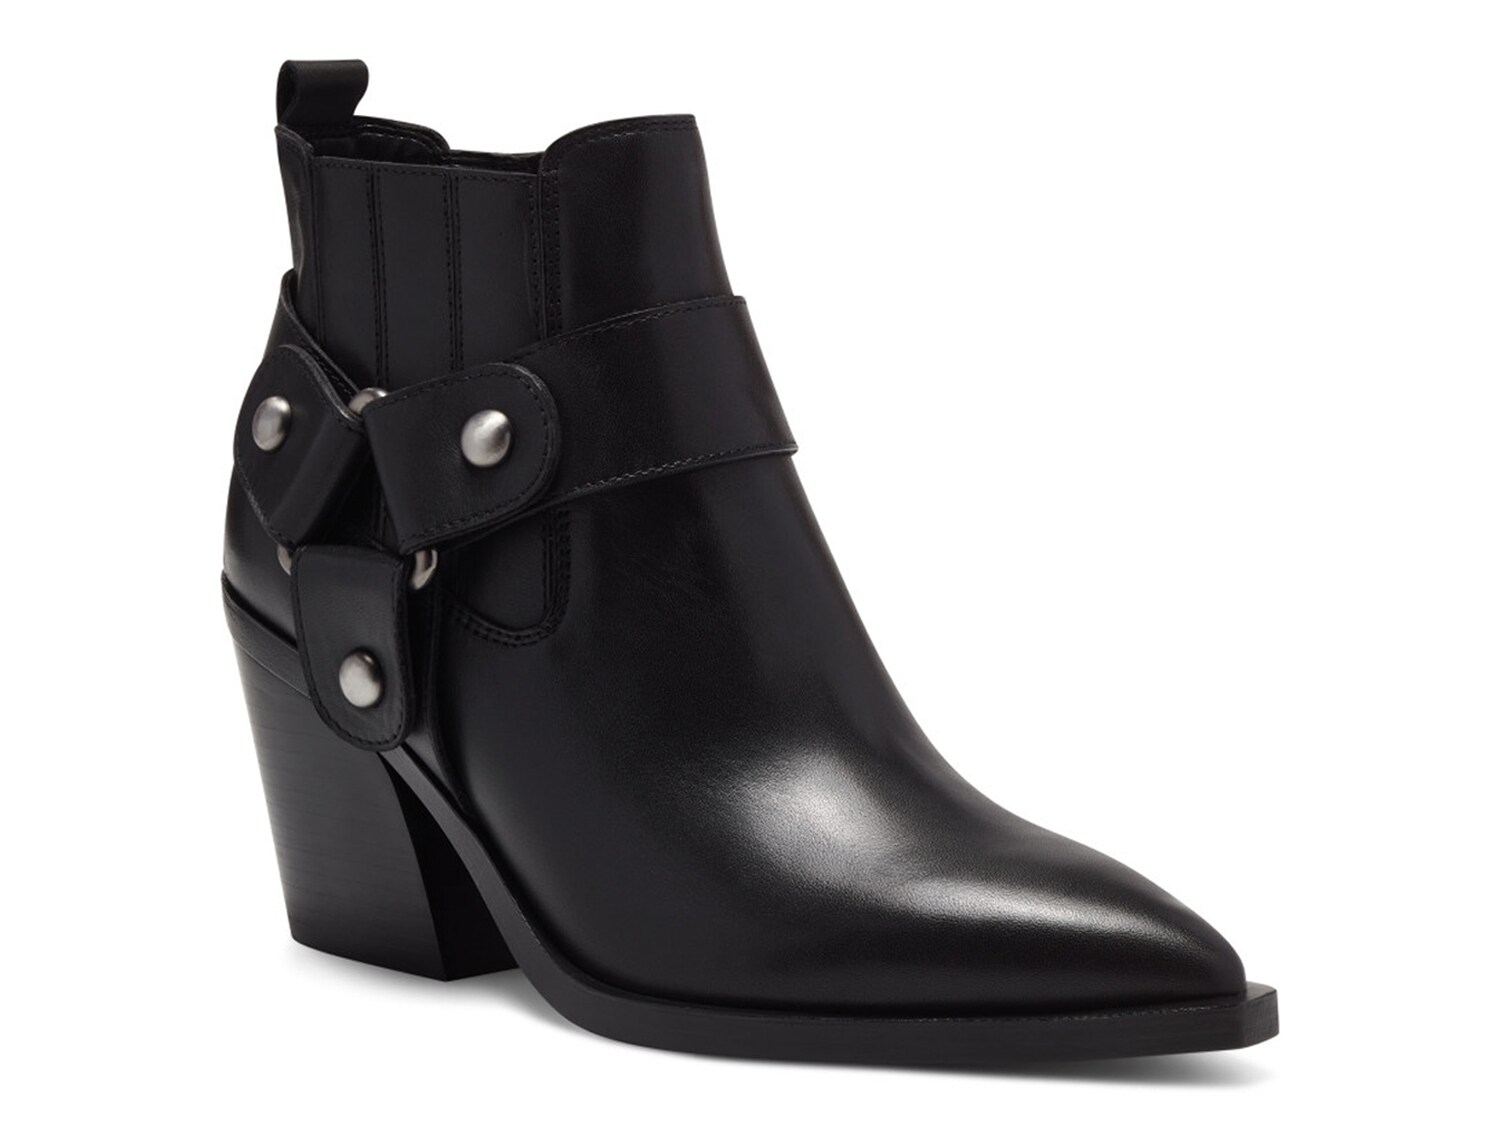 Vince Camuto Berindal Bootie - Free Shipping | DSW